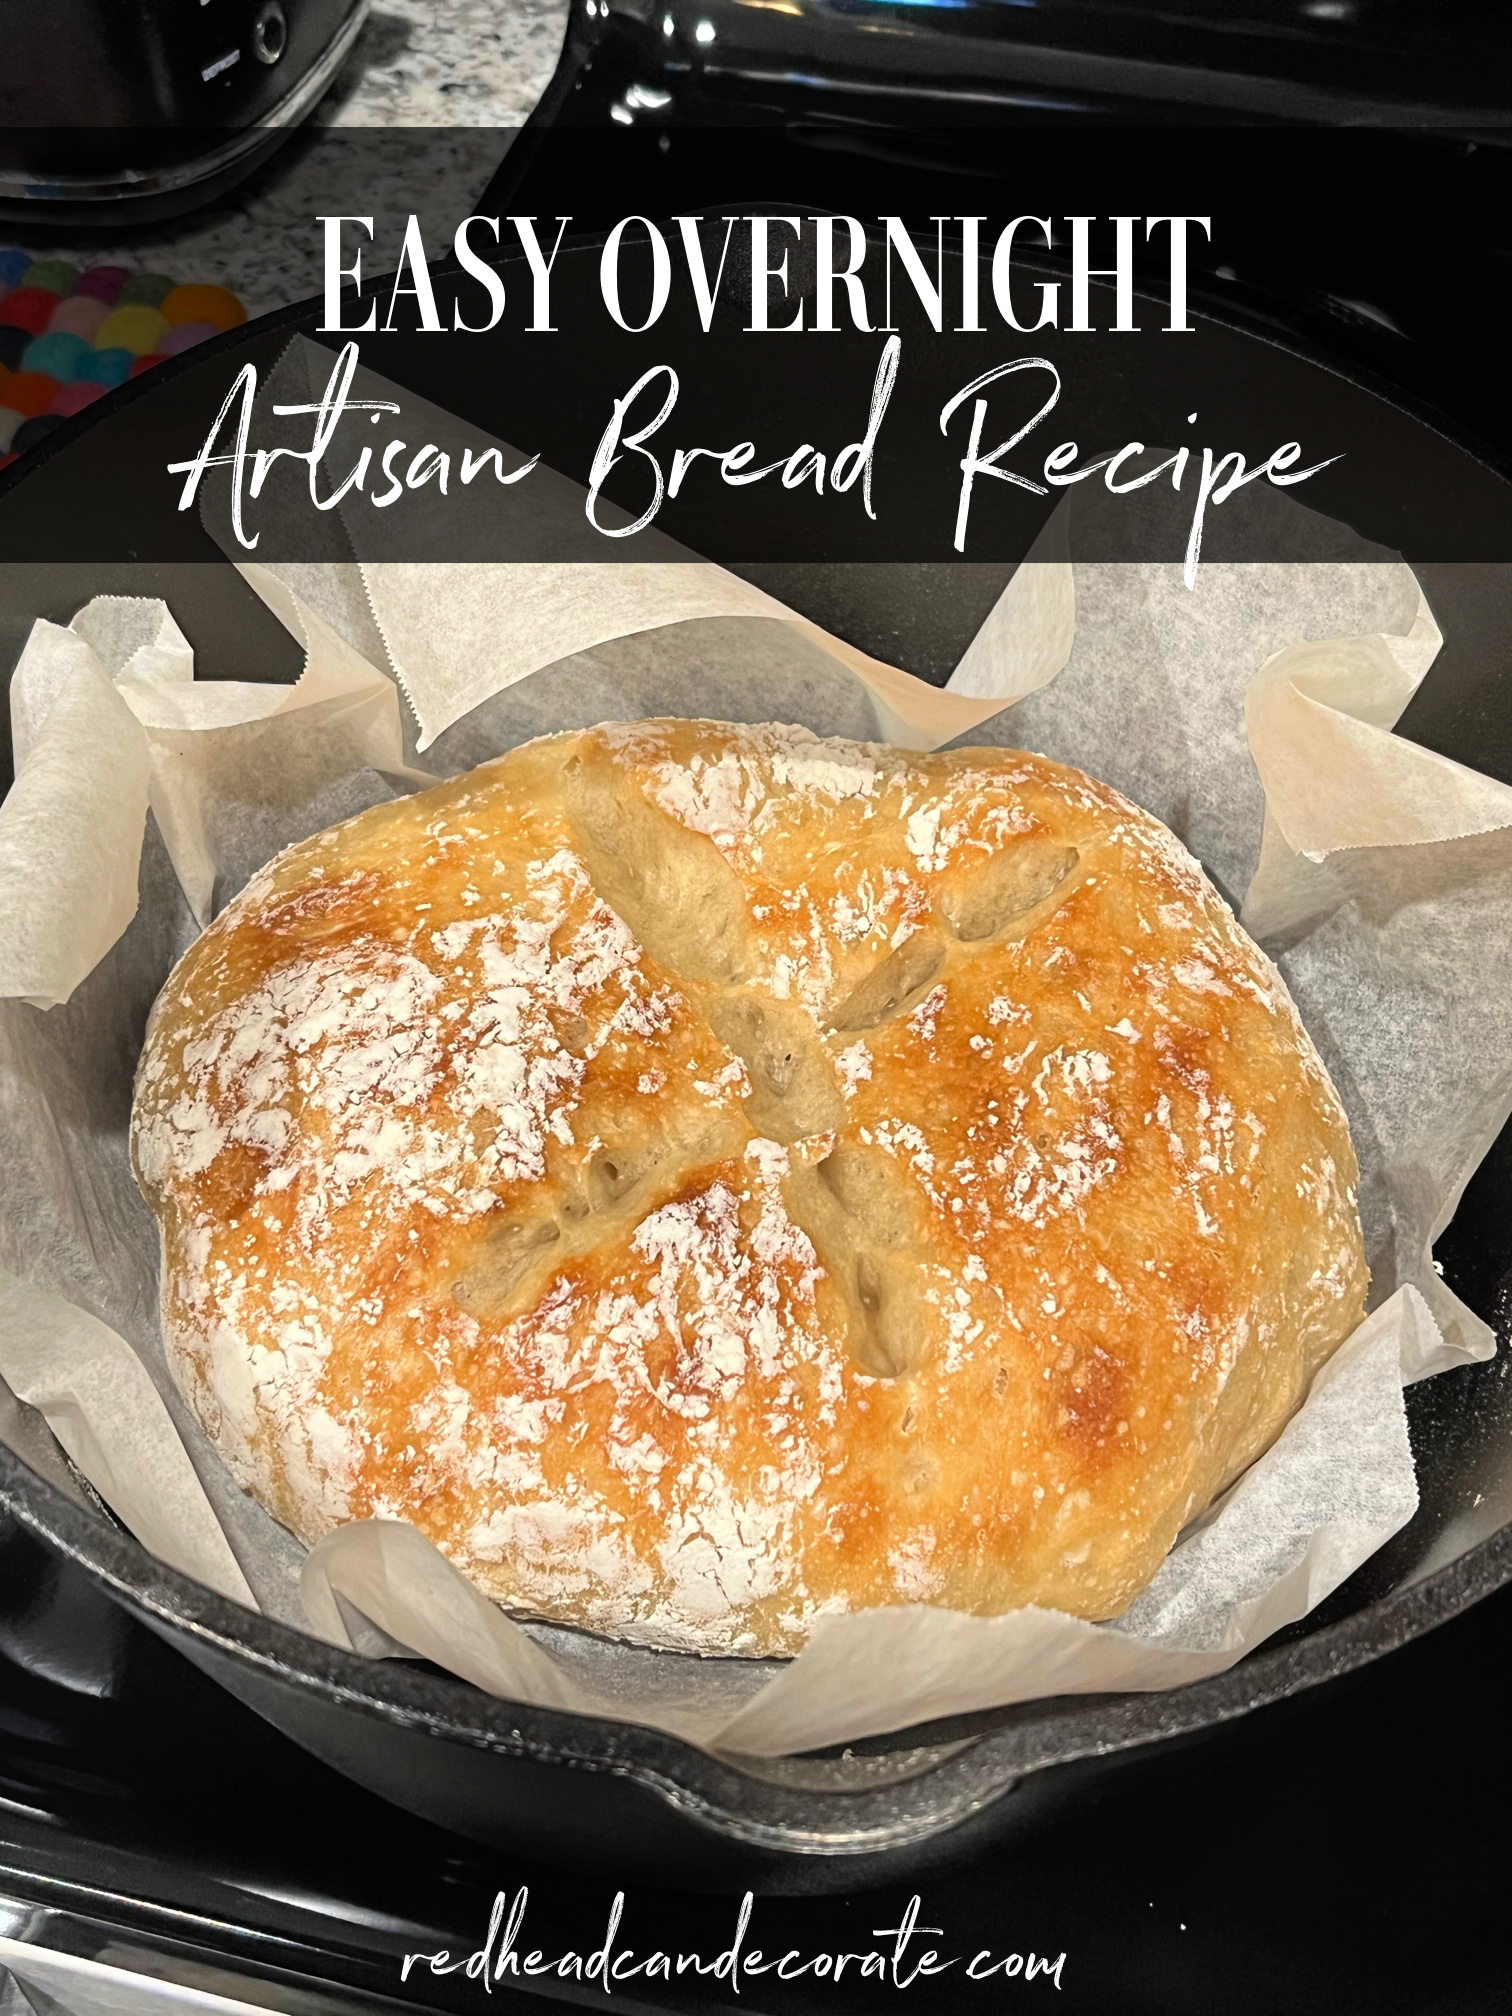 How To Make Dutch Oven Bread - NO Overnight Rise